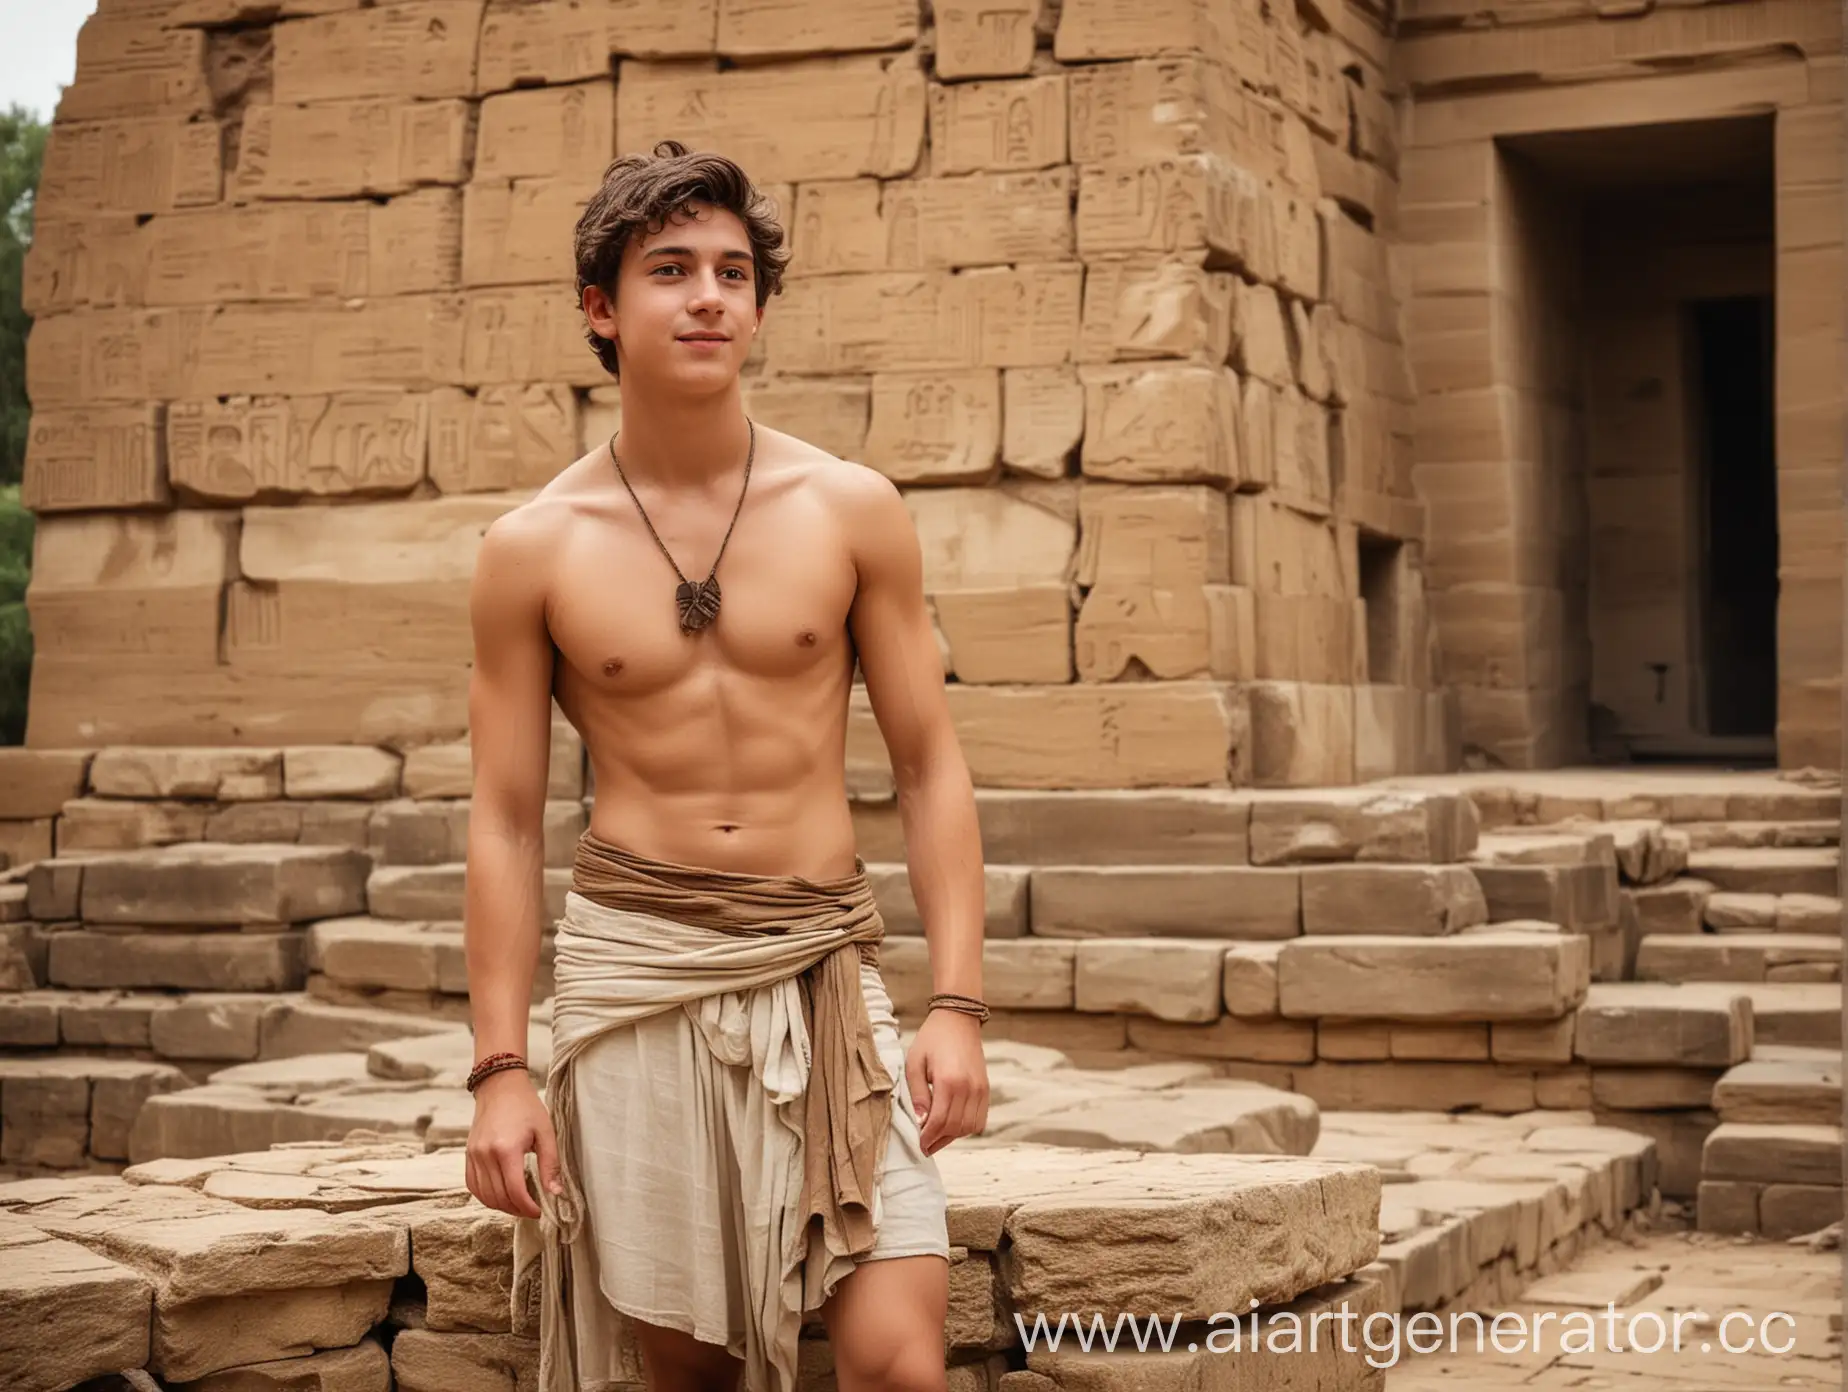 Young-Man-in-Loincloth-Building-Pyramid-in-Ancient-Egyptian-Garden